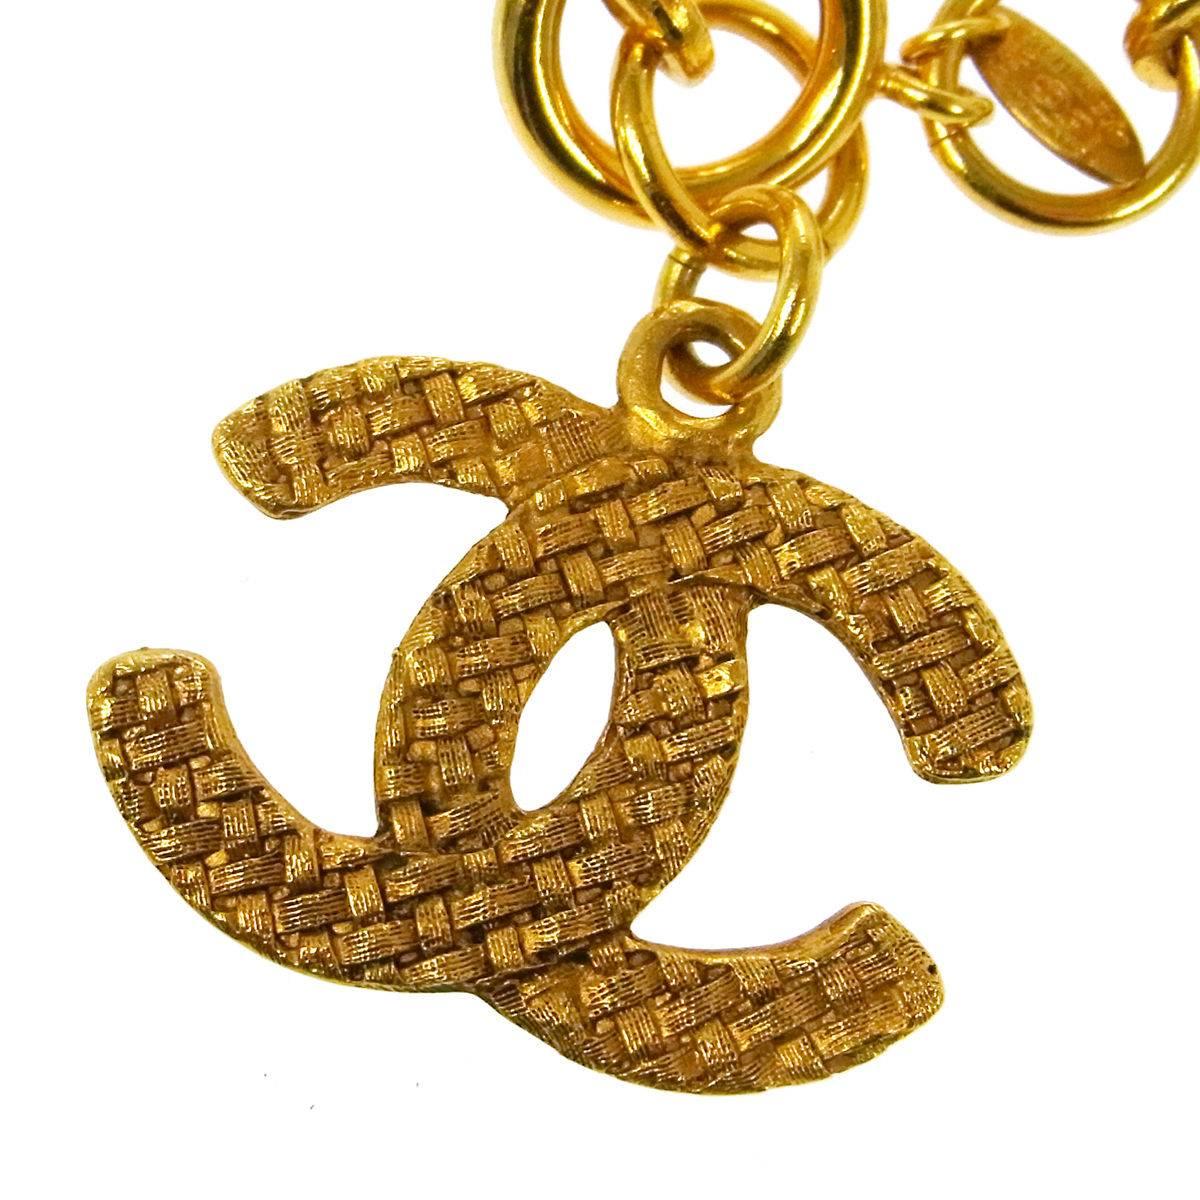 CURATOR'S NOTES

Metal
Gold tone
Lobster claw closure
Made in France
Chain length 17.7"
Charm diameter 1.5"

Shop Newfound Luxury for authentic vintage Chanel charm necklaces. 